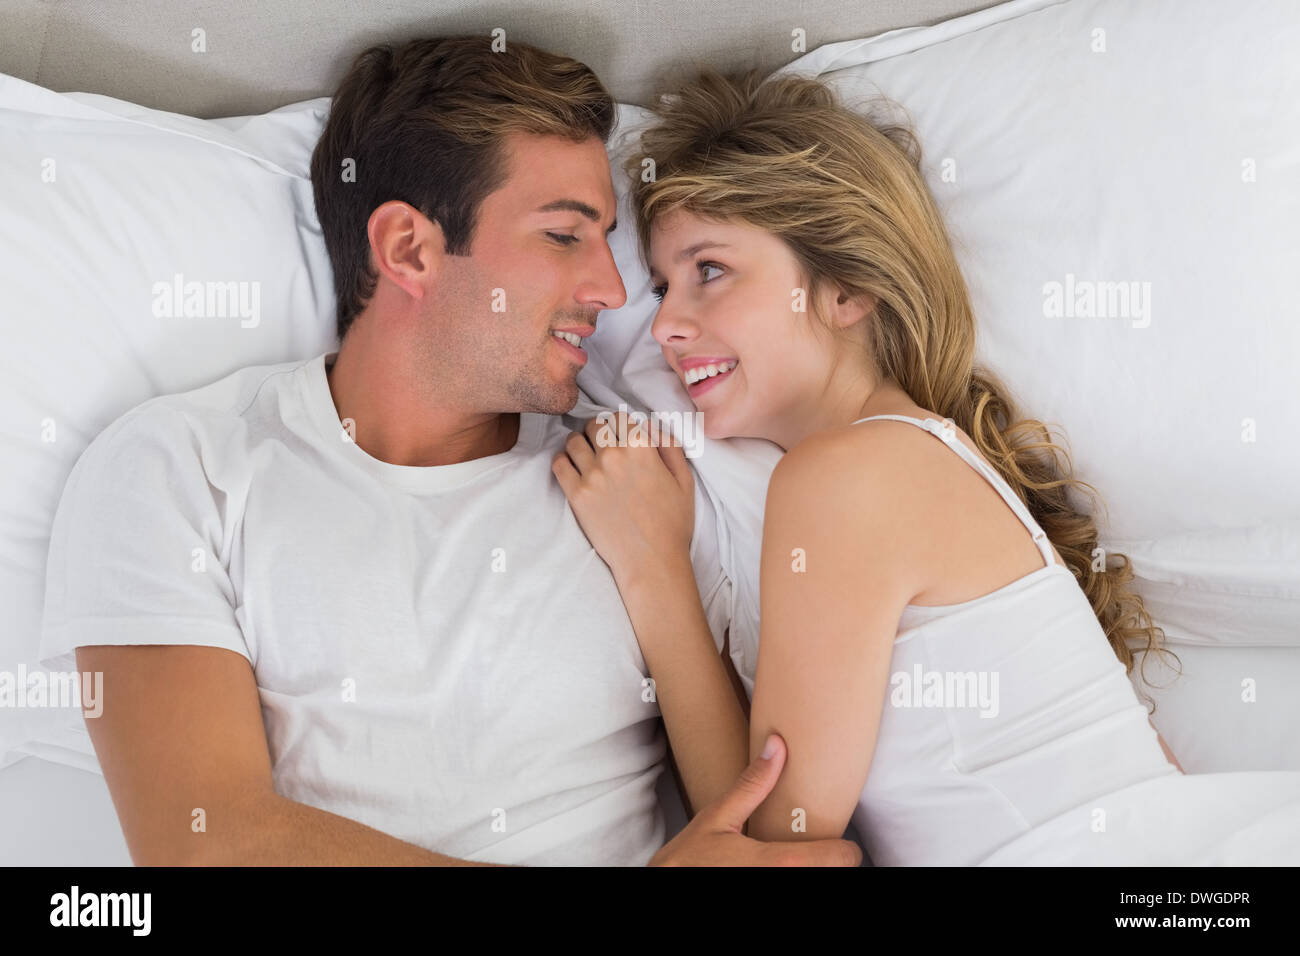 Ambiance couple resting together in bed Banque D'Images